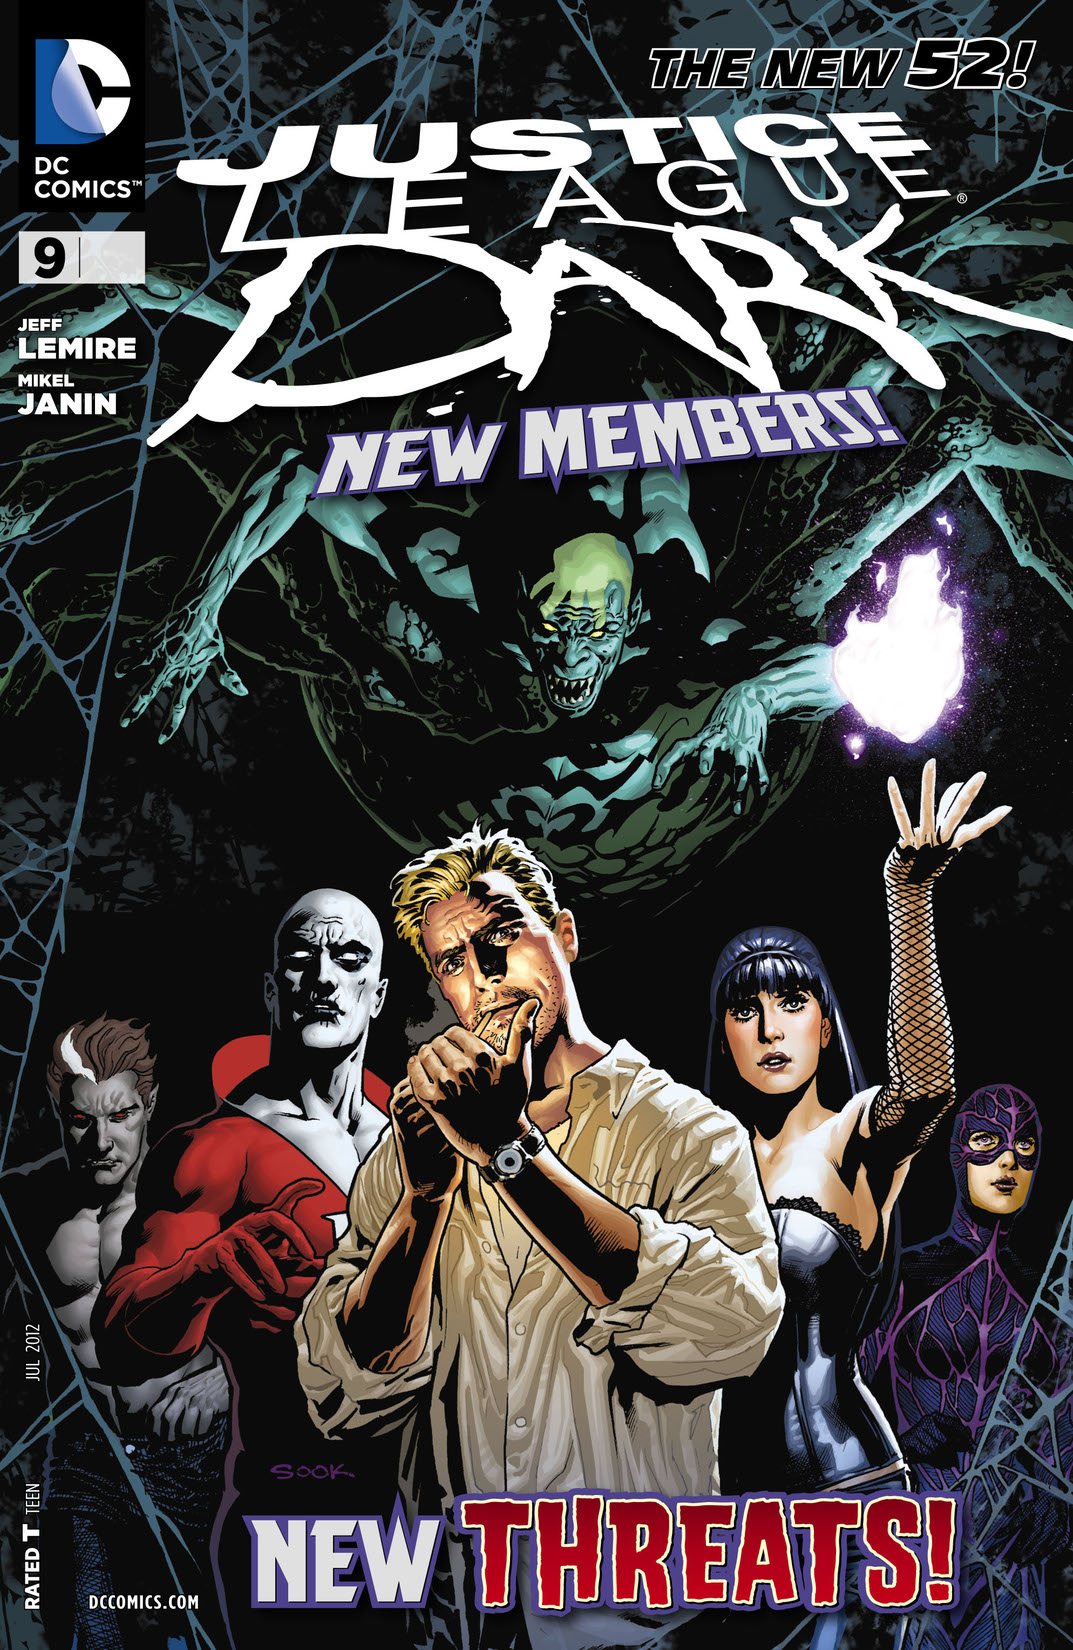 Justice League Dark (2011-) #9 preview images